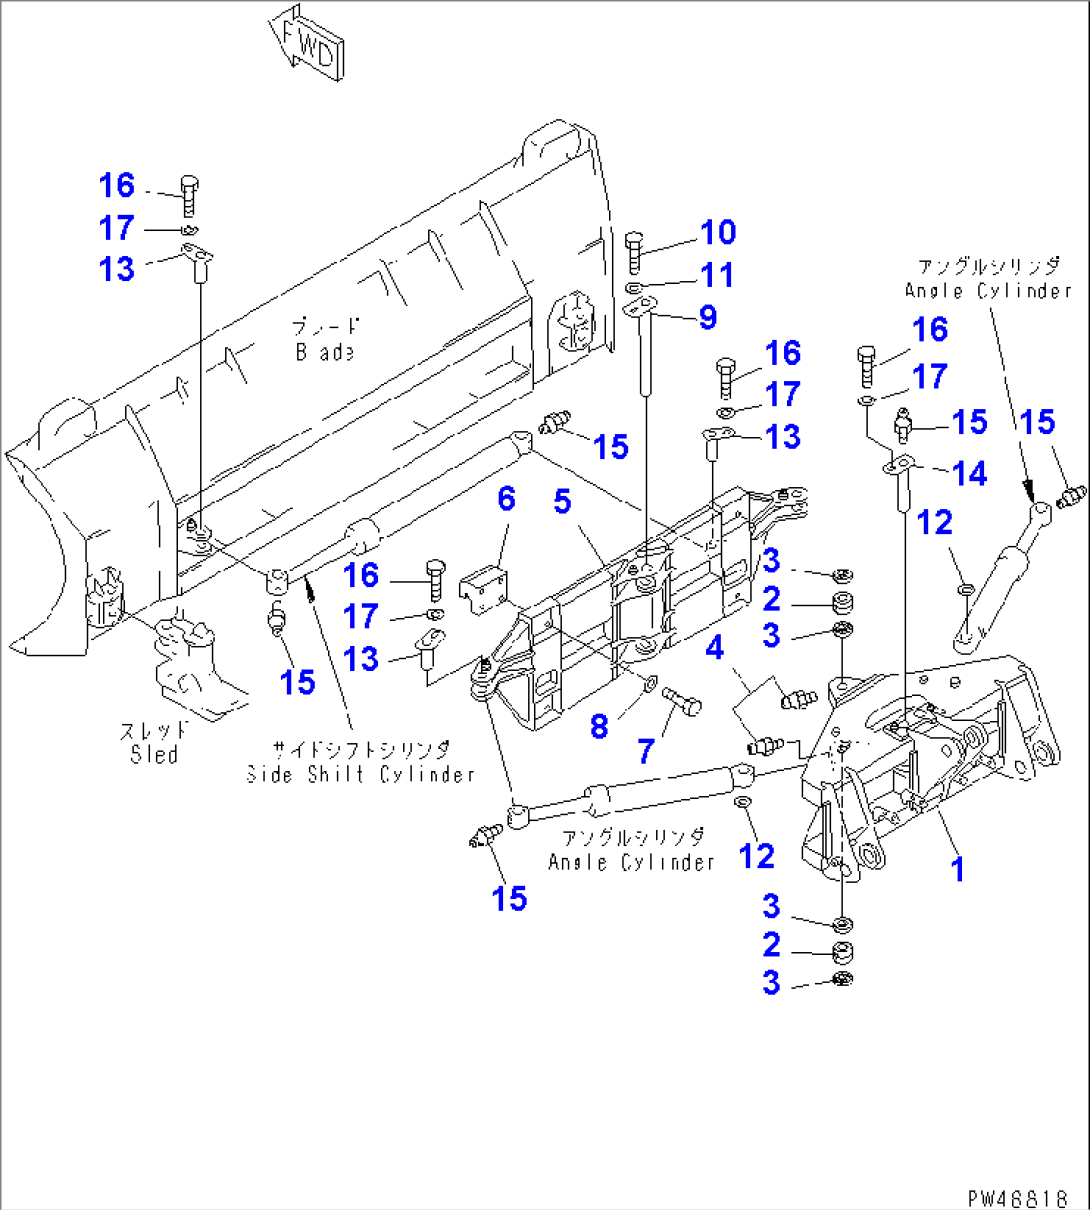 SIDE SHIFT¤ PITCH AND ANGLE SNOW PLOW (2/4) (CARRIER)(#50001-)